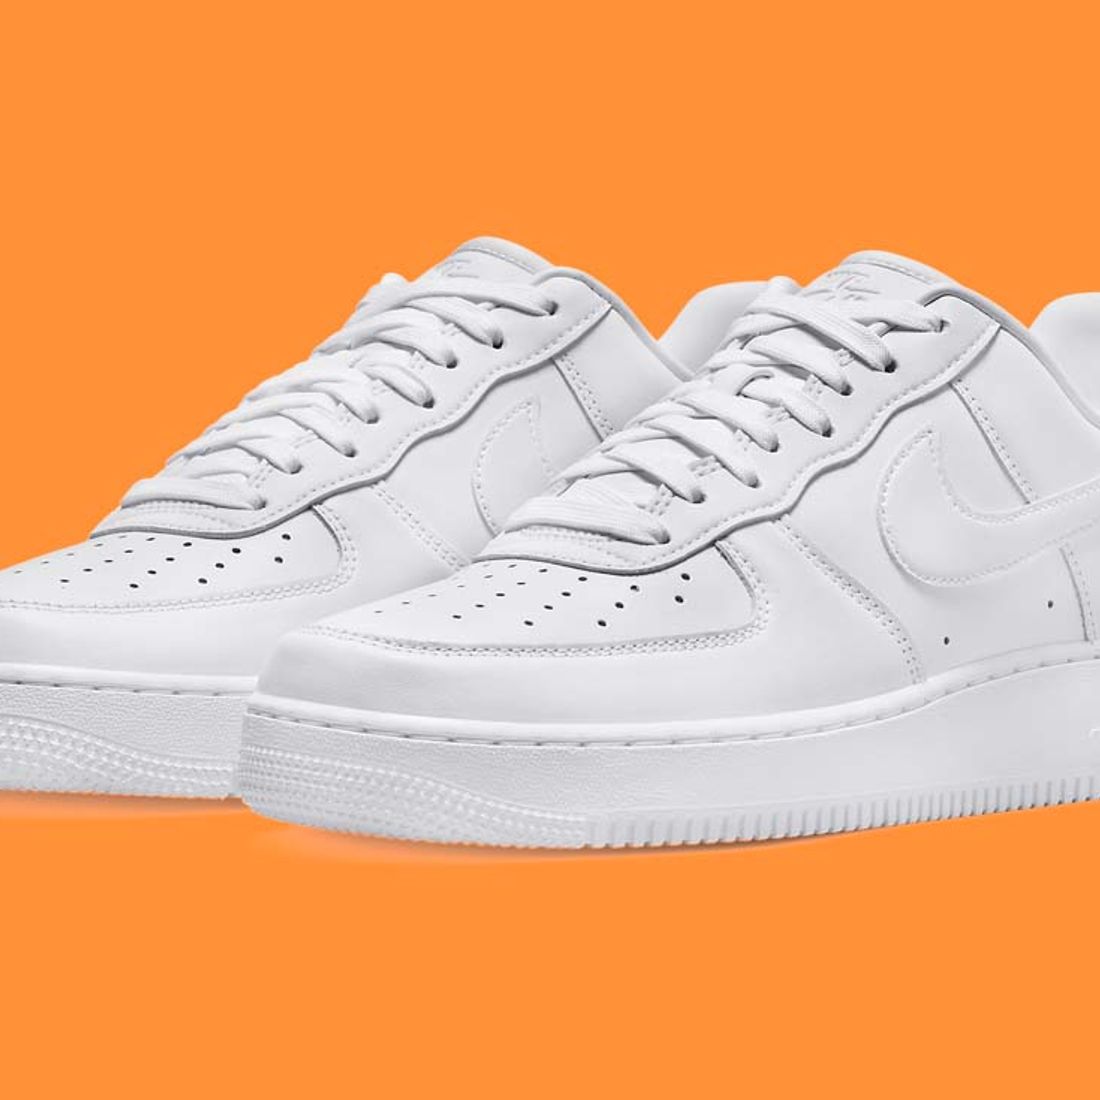 Orange Canvas Covers This New Air Force 1 Low